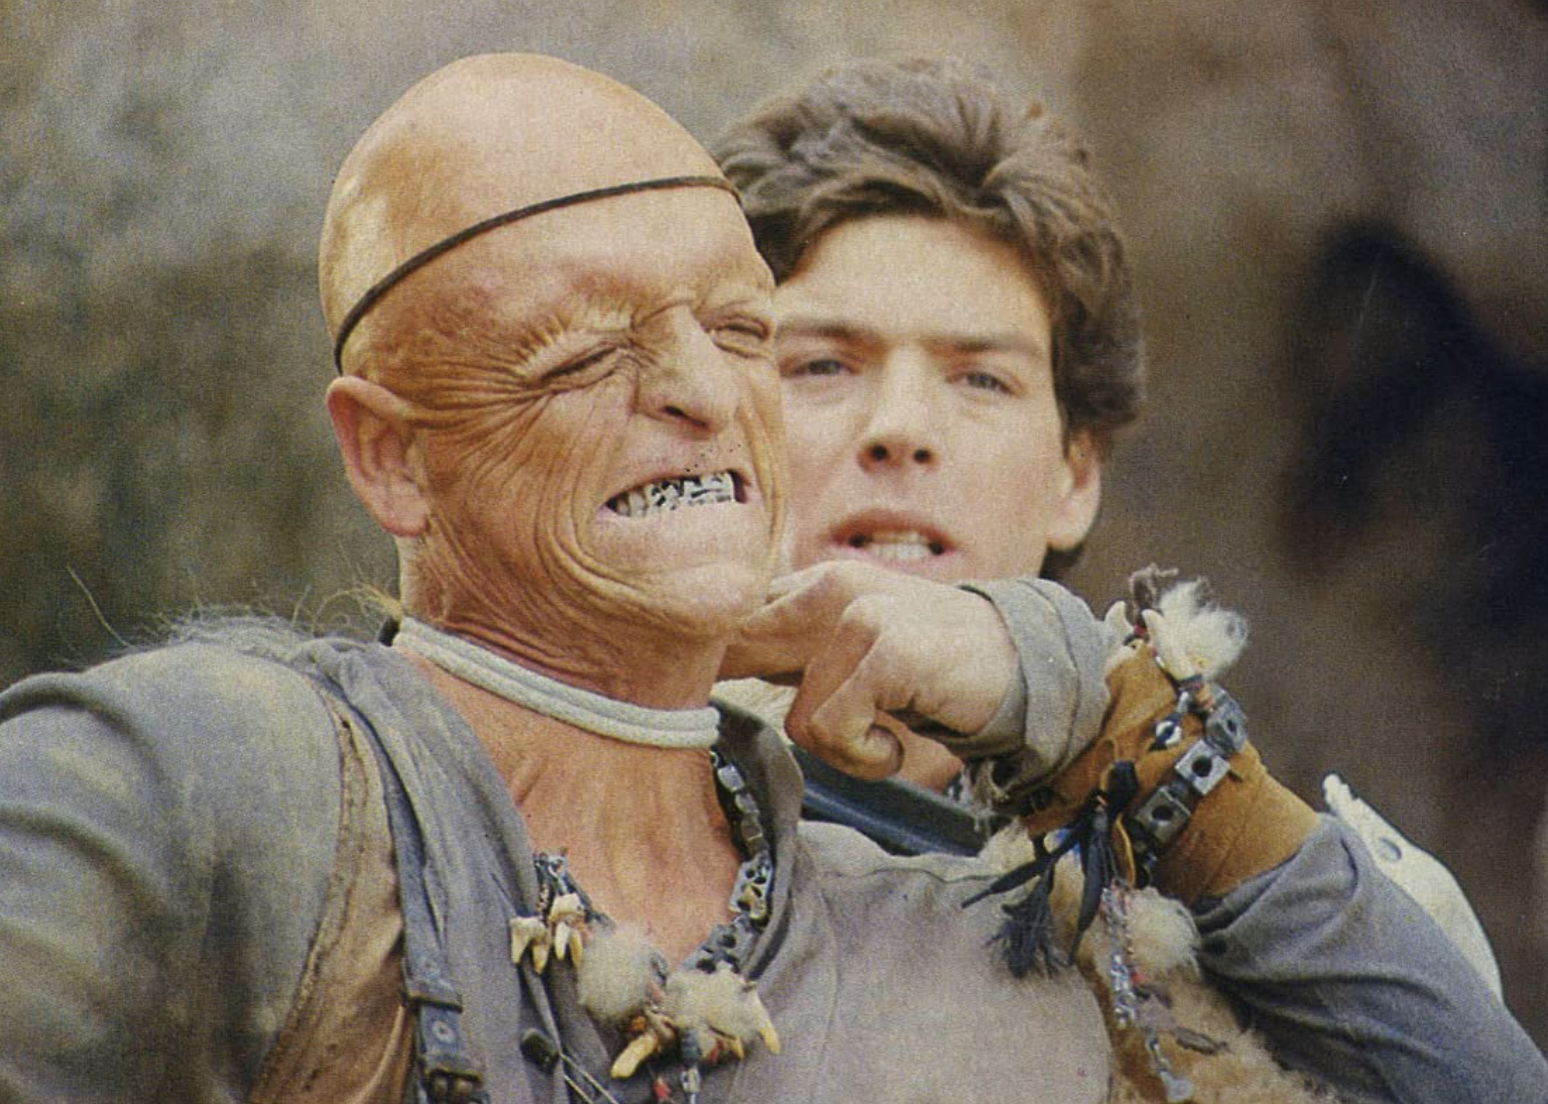 Michael Berryman and Kevin Spirtas in The Hills Have Eyes Part II